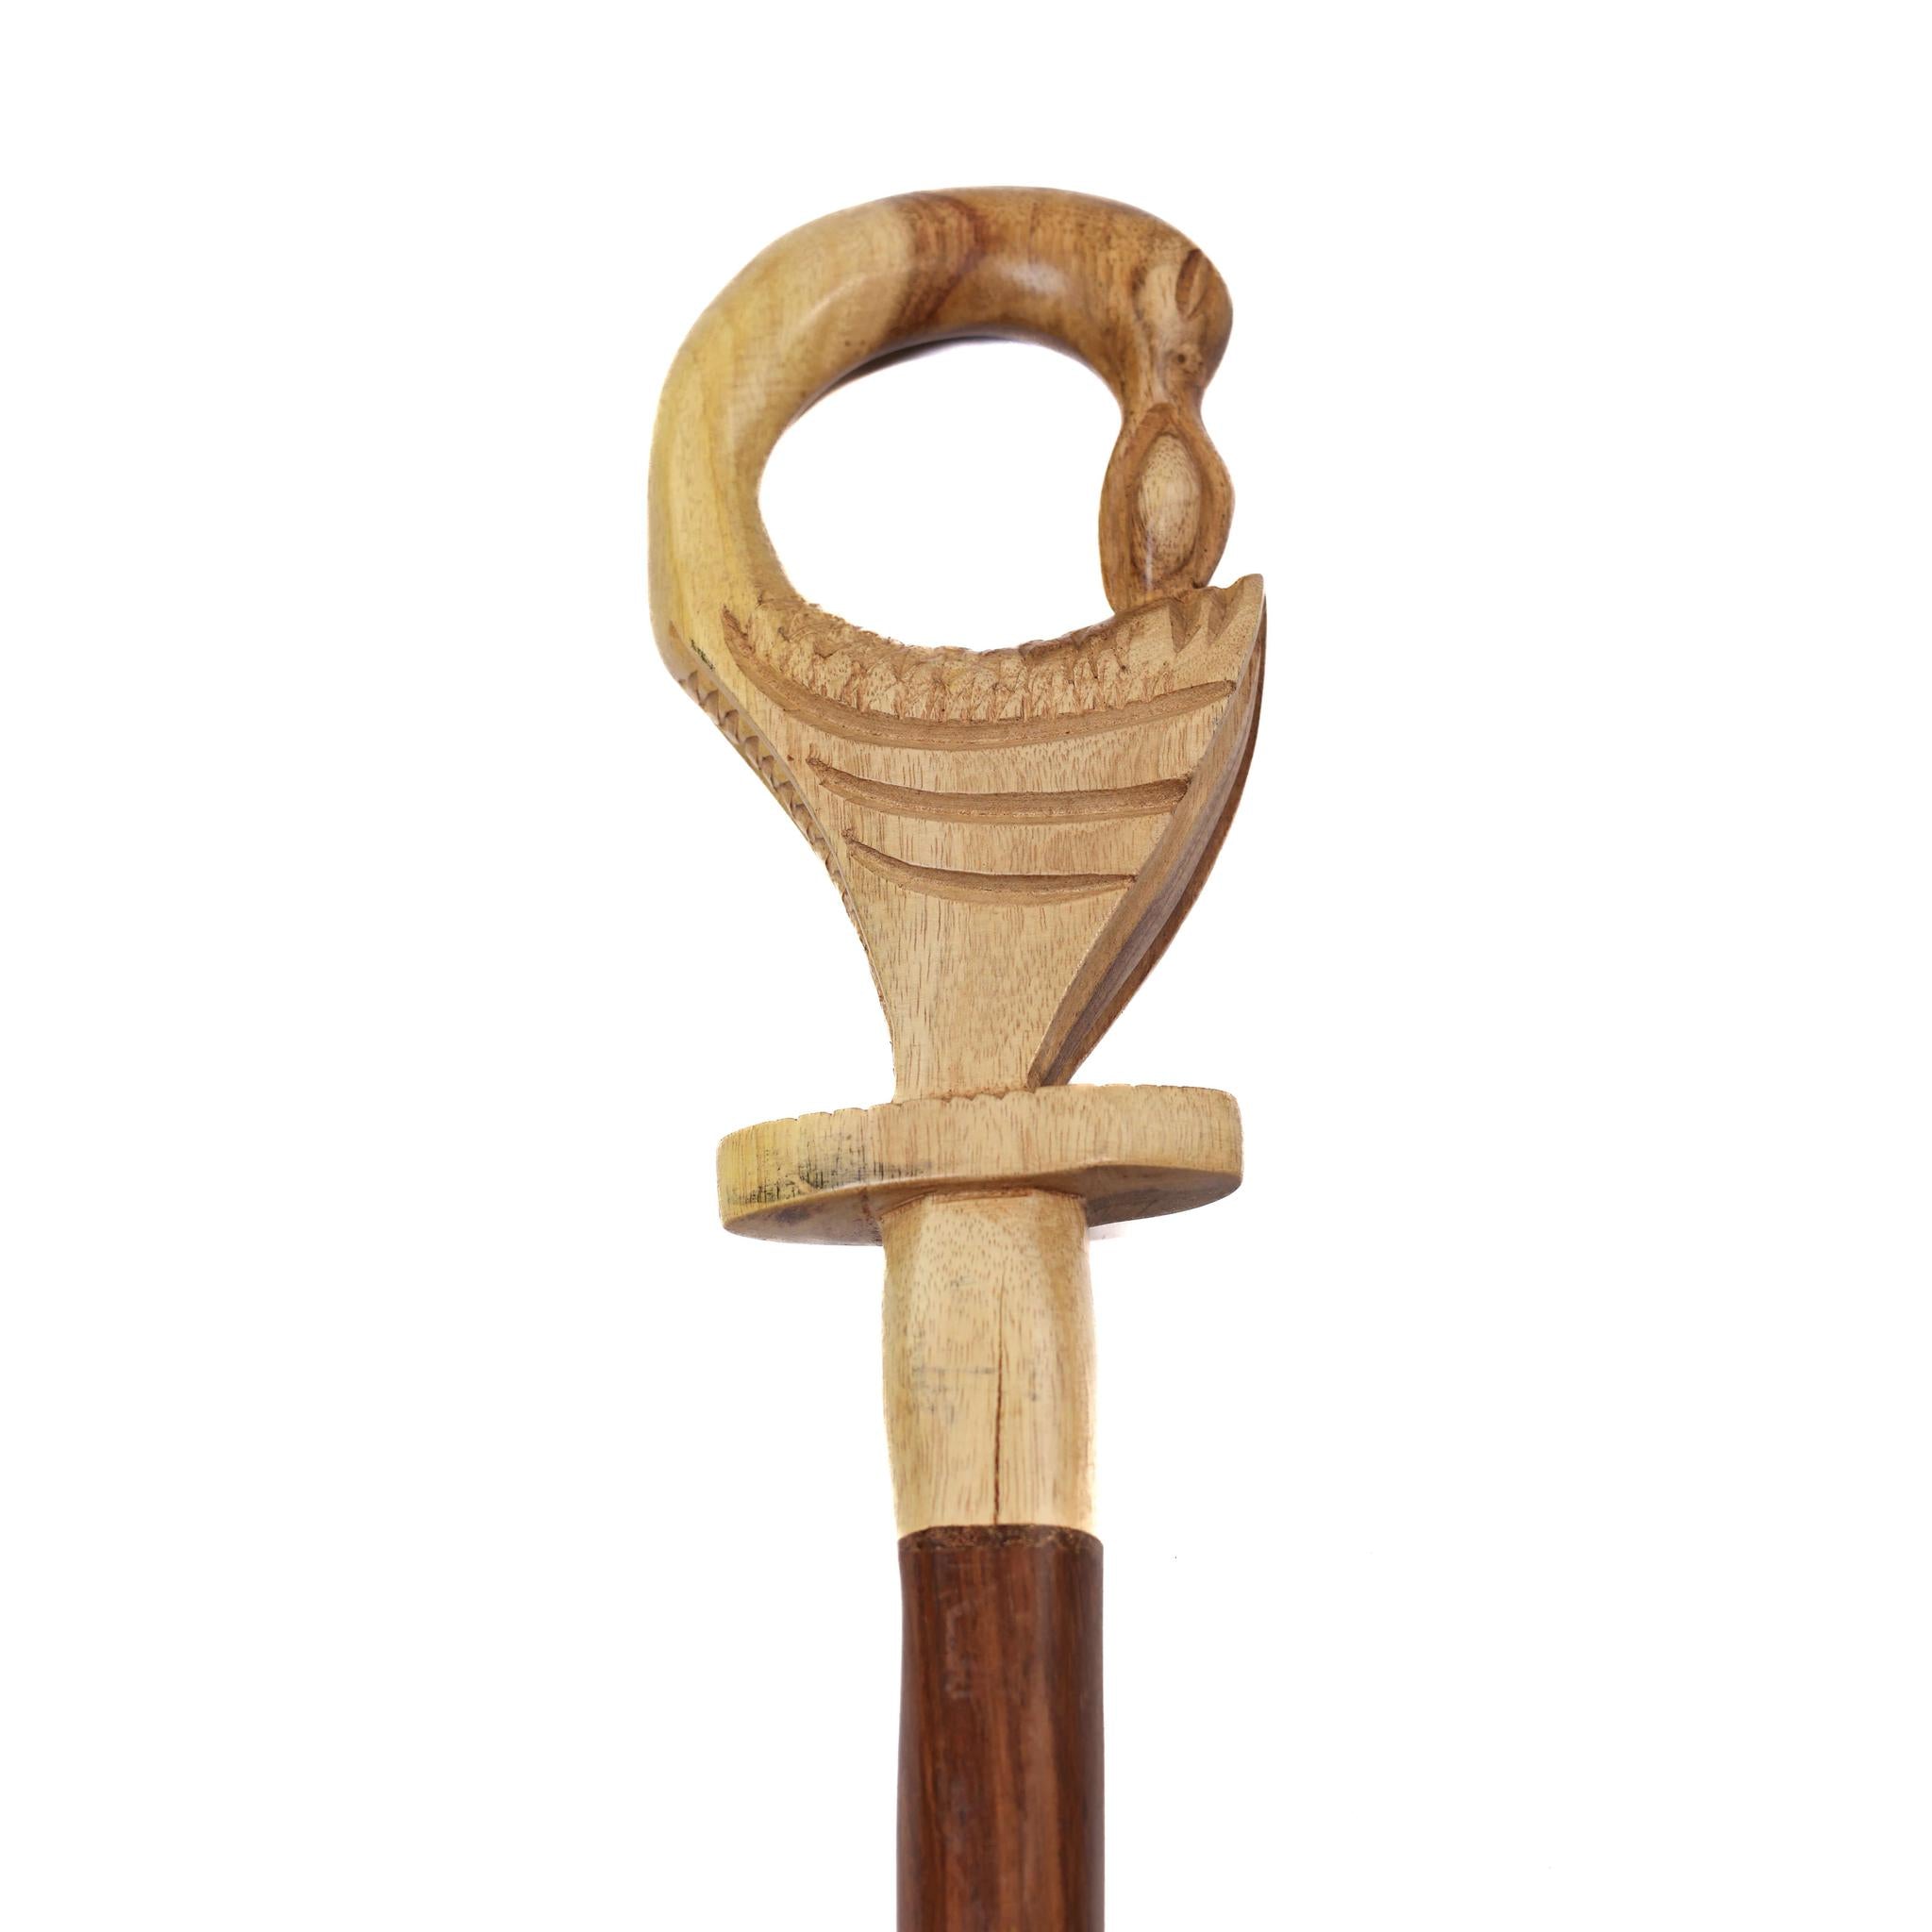 Hand-Carved Ghanaian Walking Stick Features Sankofa Symbol for Strength and Heritage